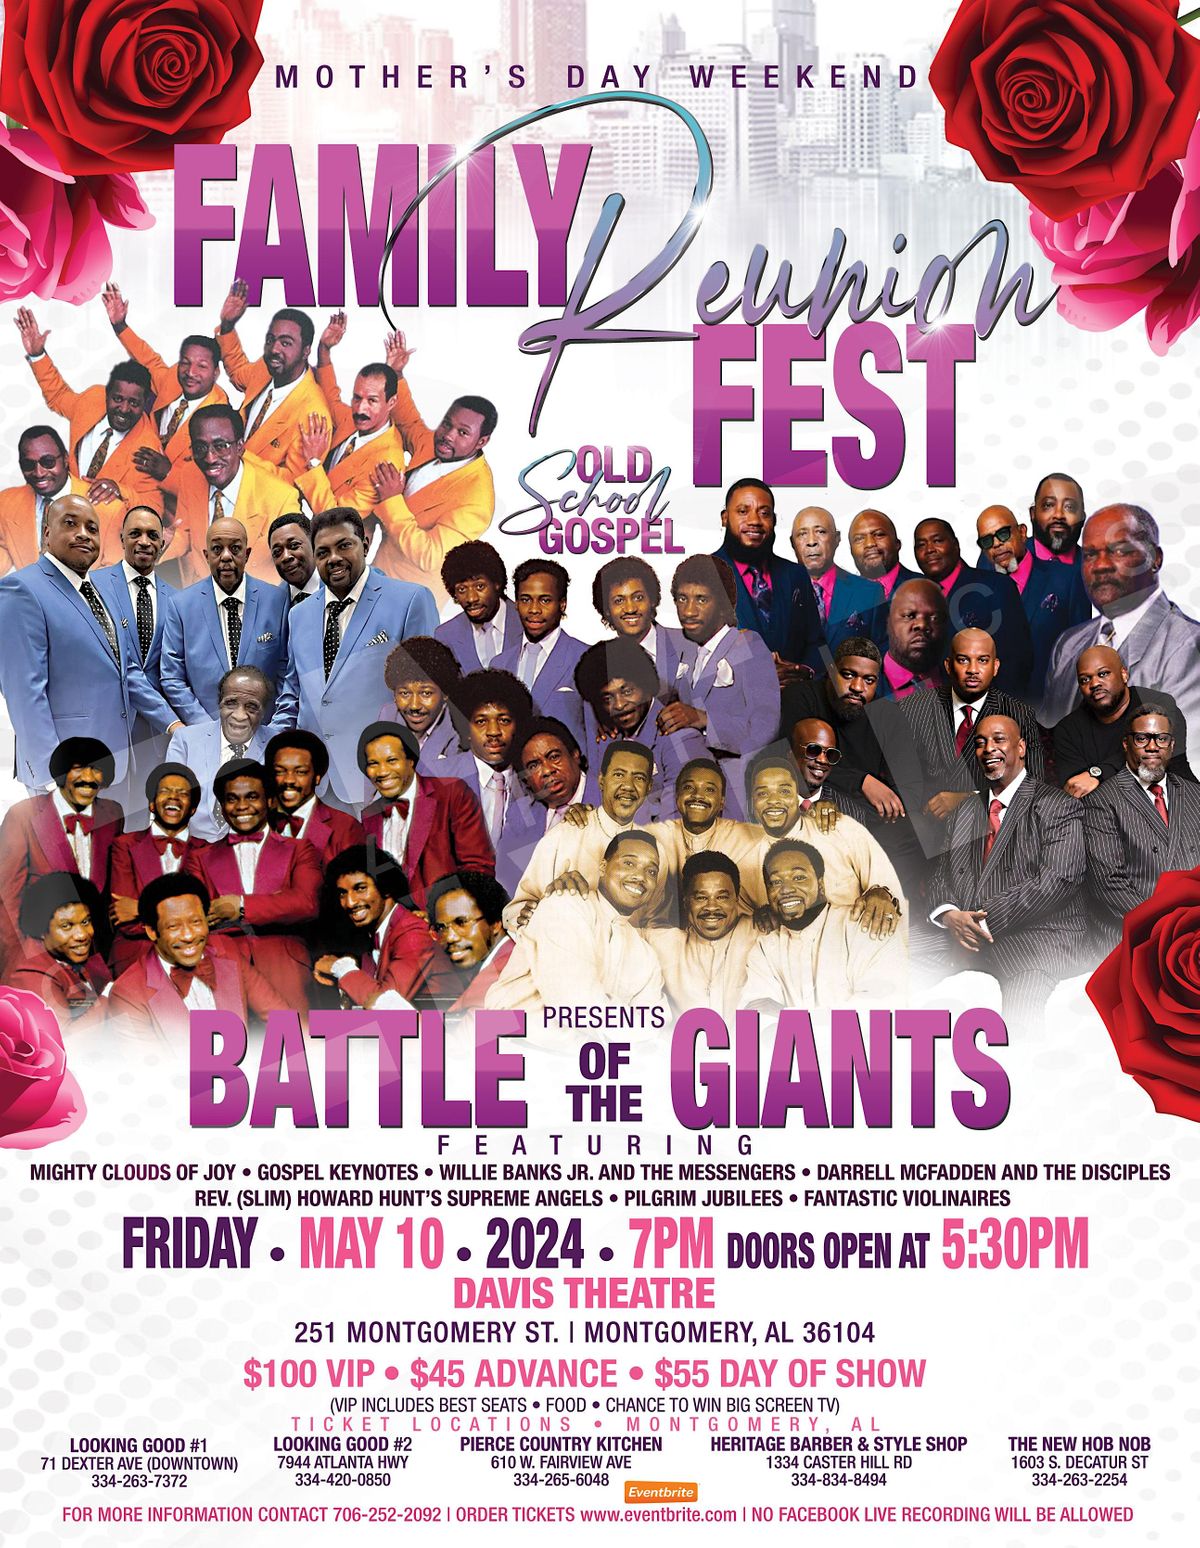 Battle of the Giants: Mighty Clouds, Keynotes, Willie Banks Jr. & others